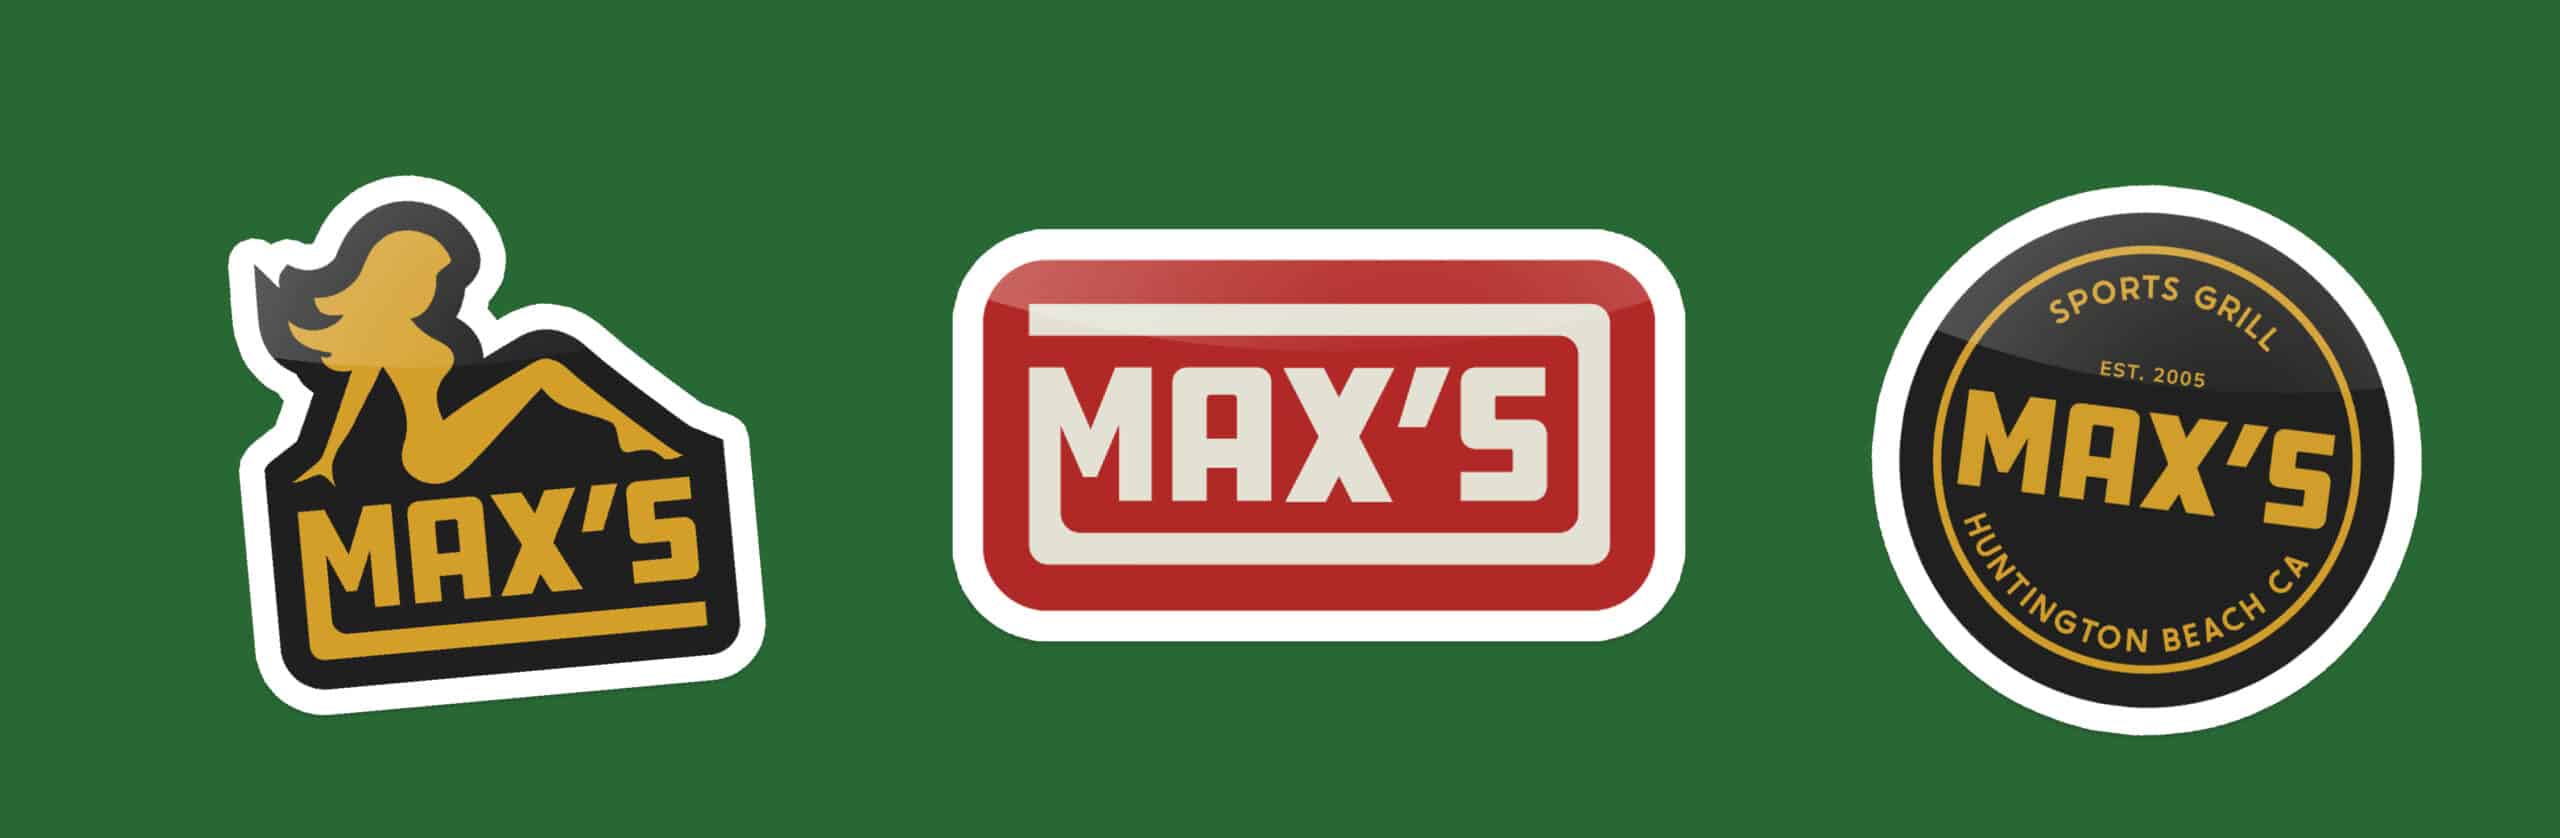 Sticker design for Maxs Sports grill in Huntington Beach California by Stellen Design specializing in Hospitality group branding brand design and logo design